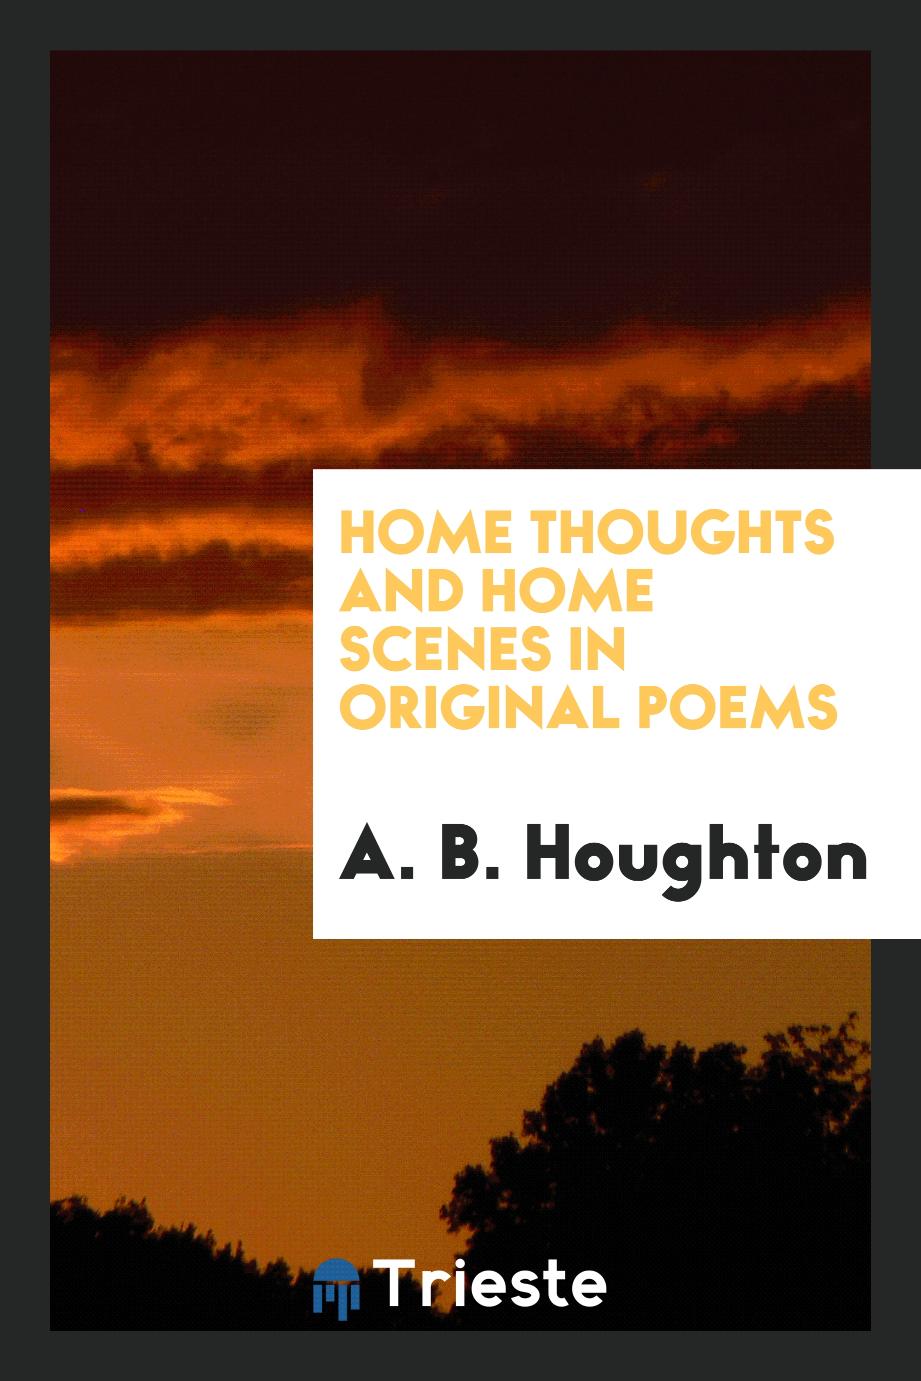 Home Thoughts and Home Scenes in Original Poems